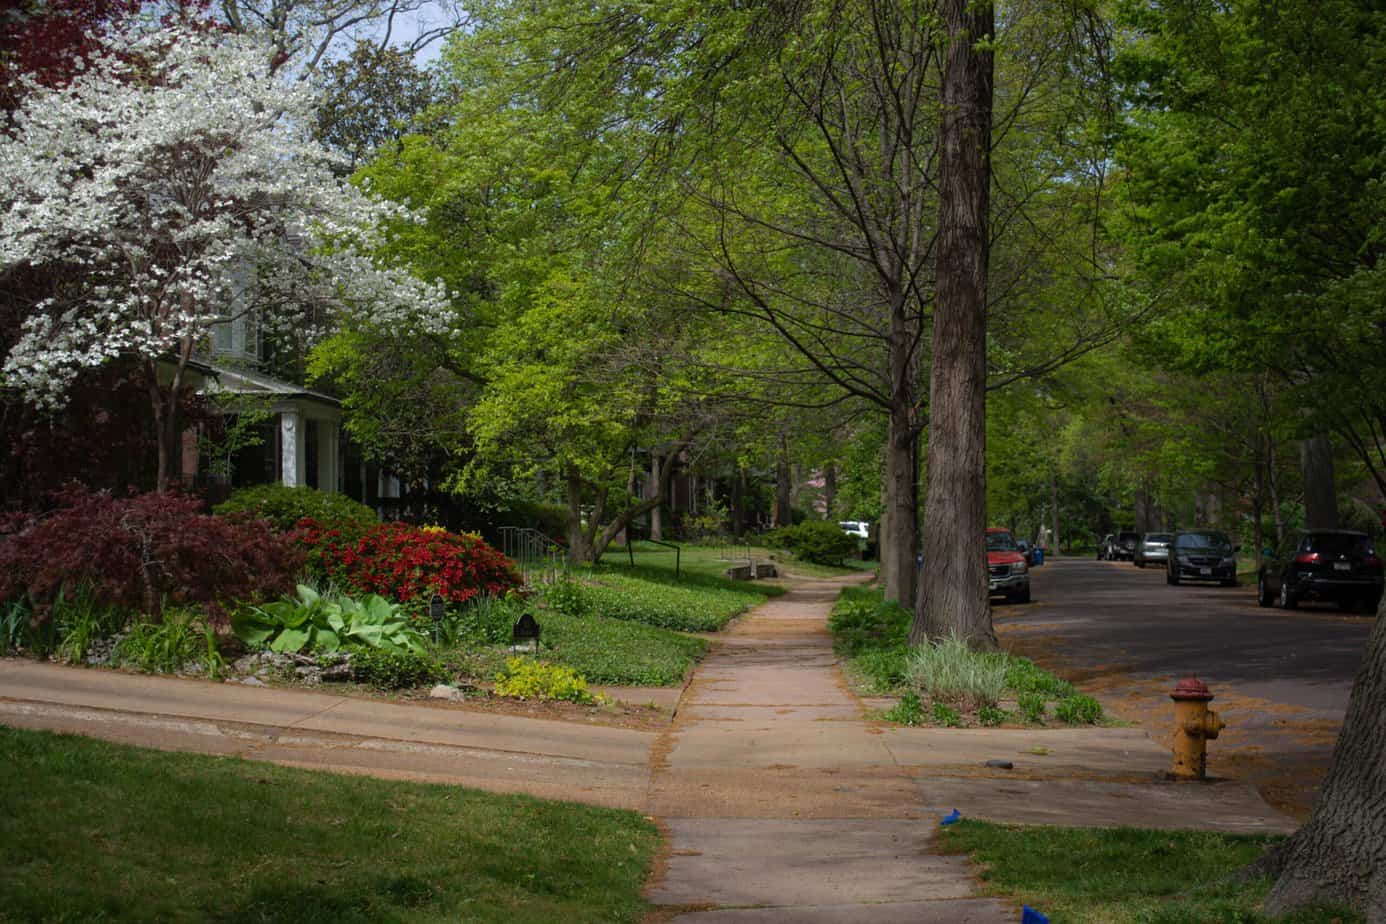 A sidewalk in a suburban neighborhood with green trees as an example of a mindful walk